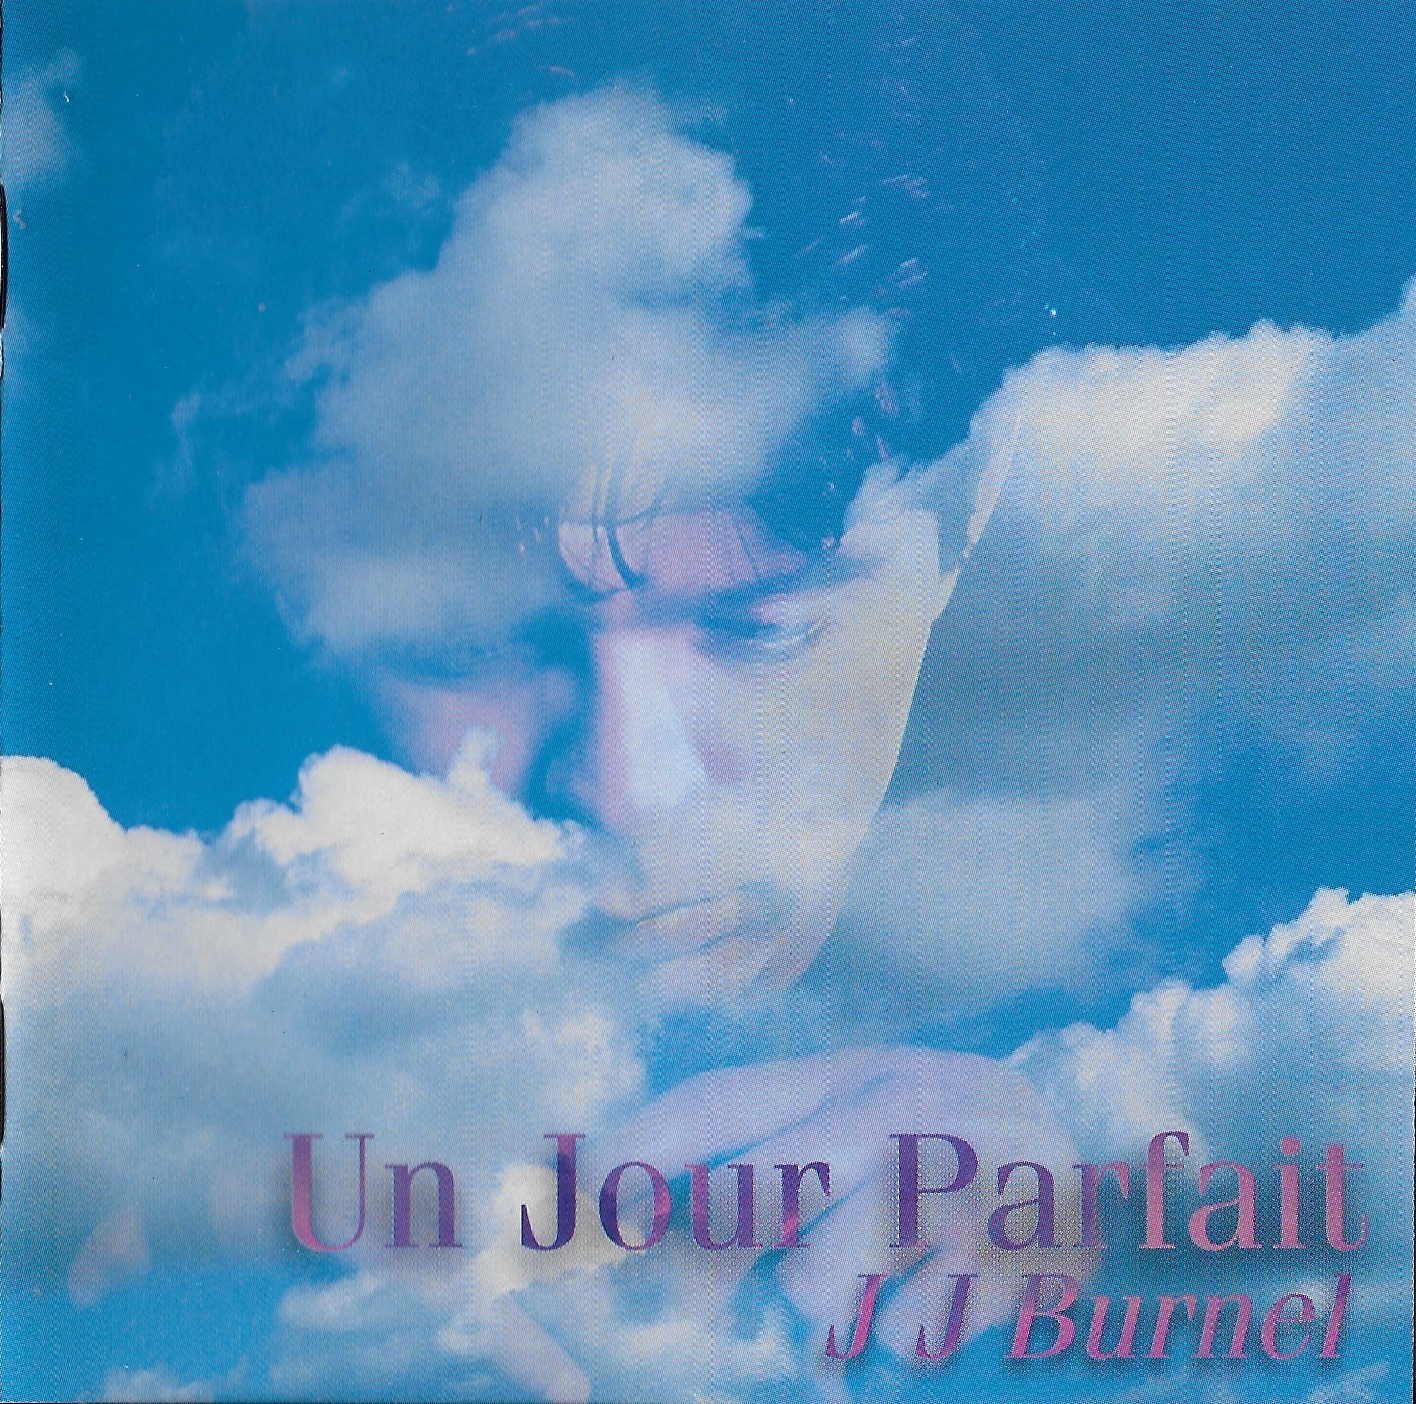 Picture of SISCD 002 Un jour parfait by artist Jean Jacques Burnel from The Stranglers